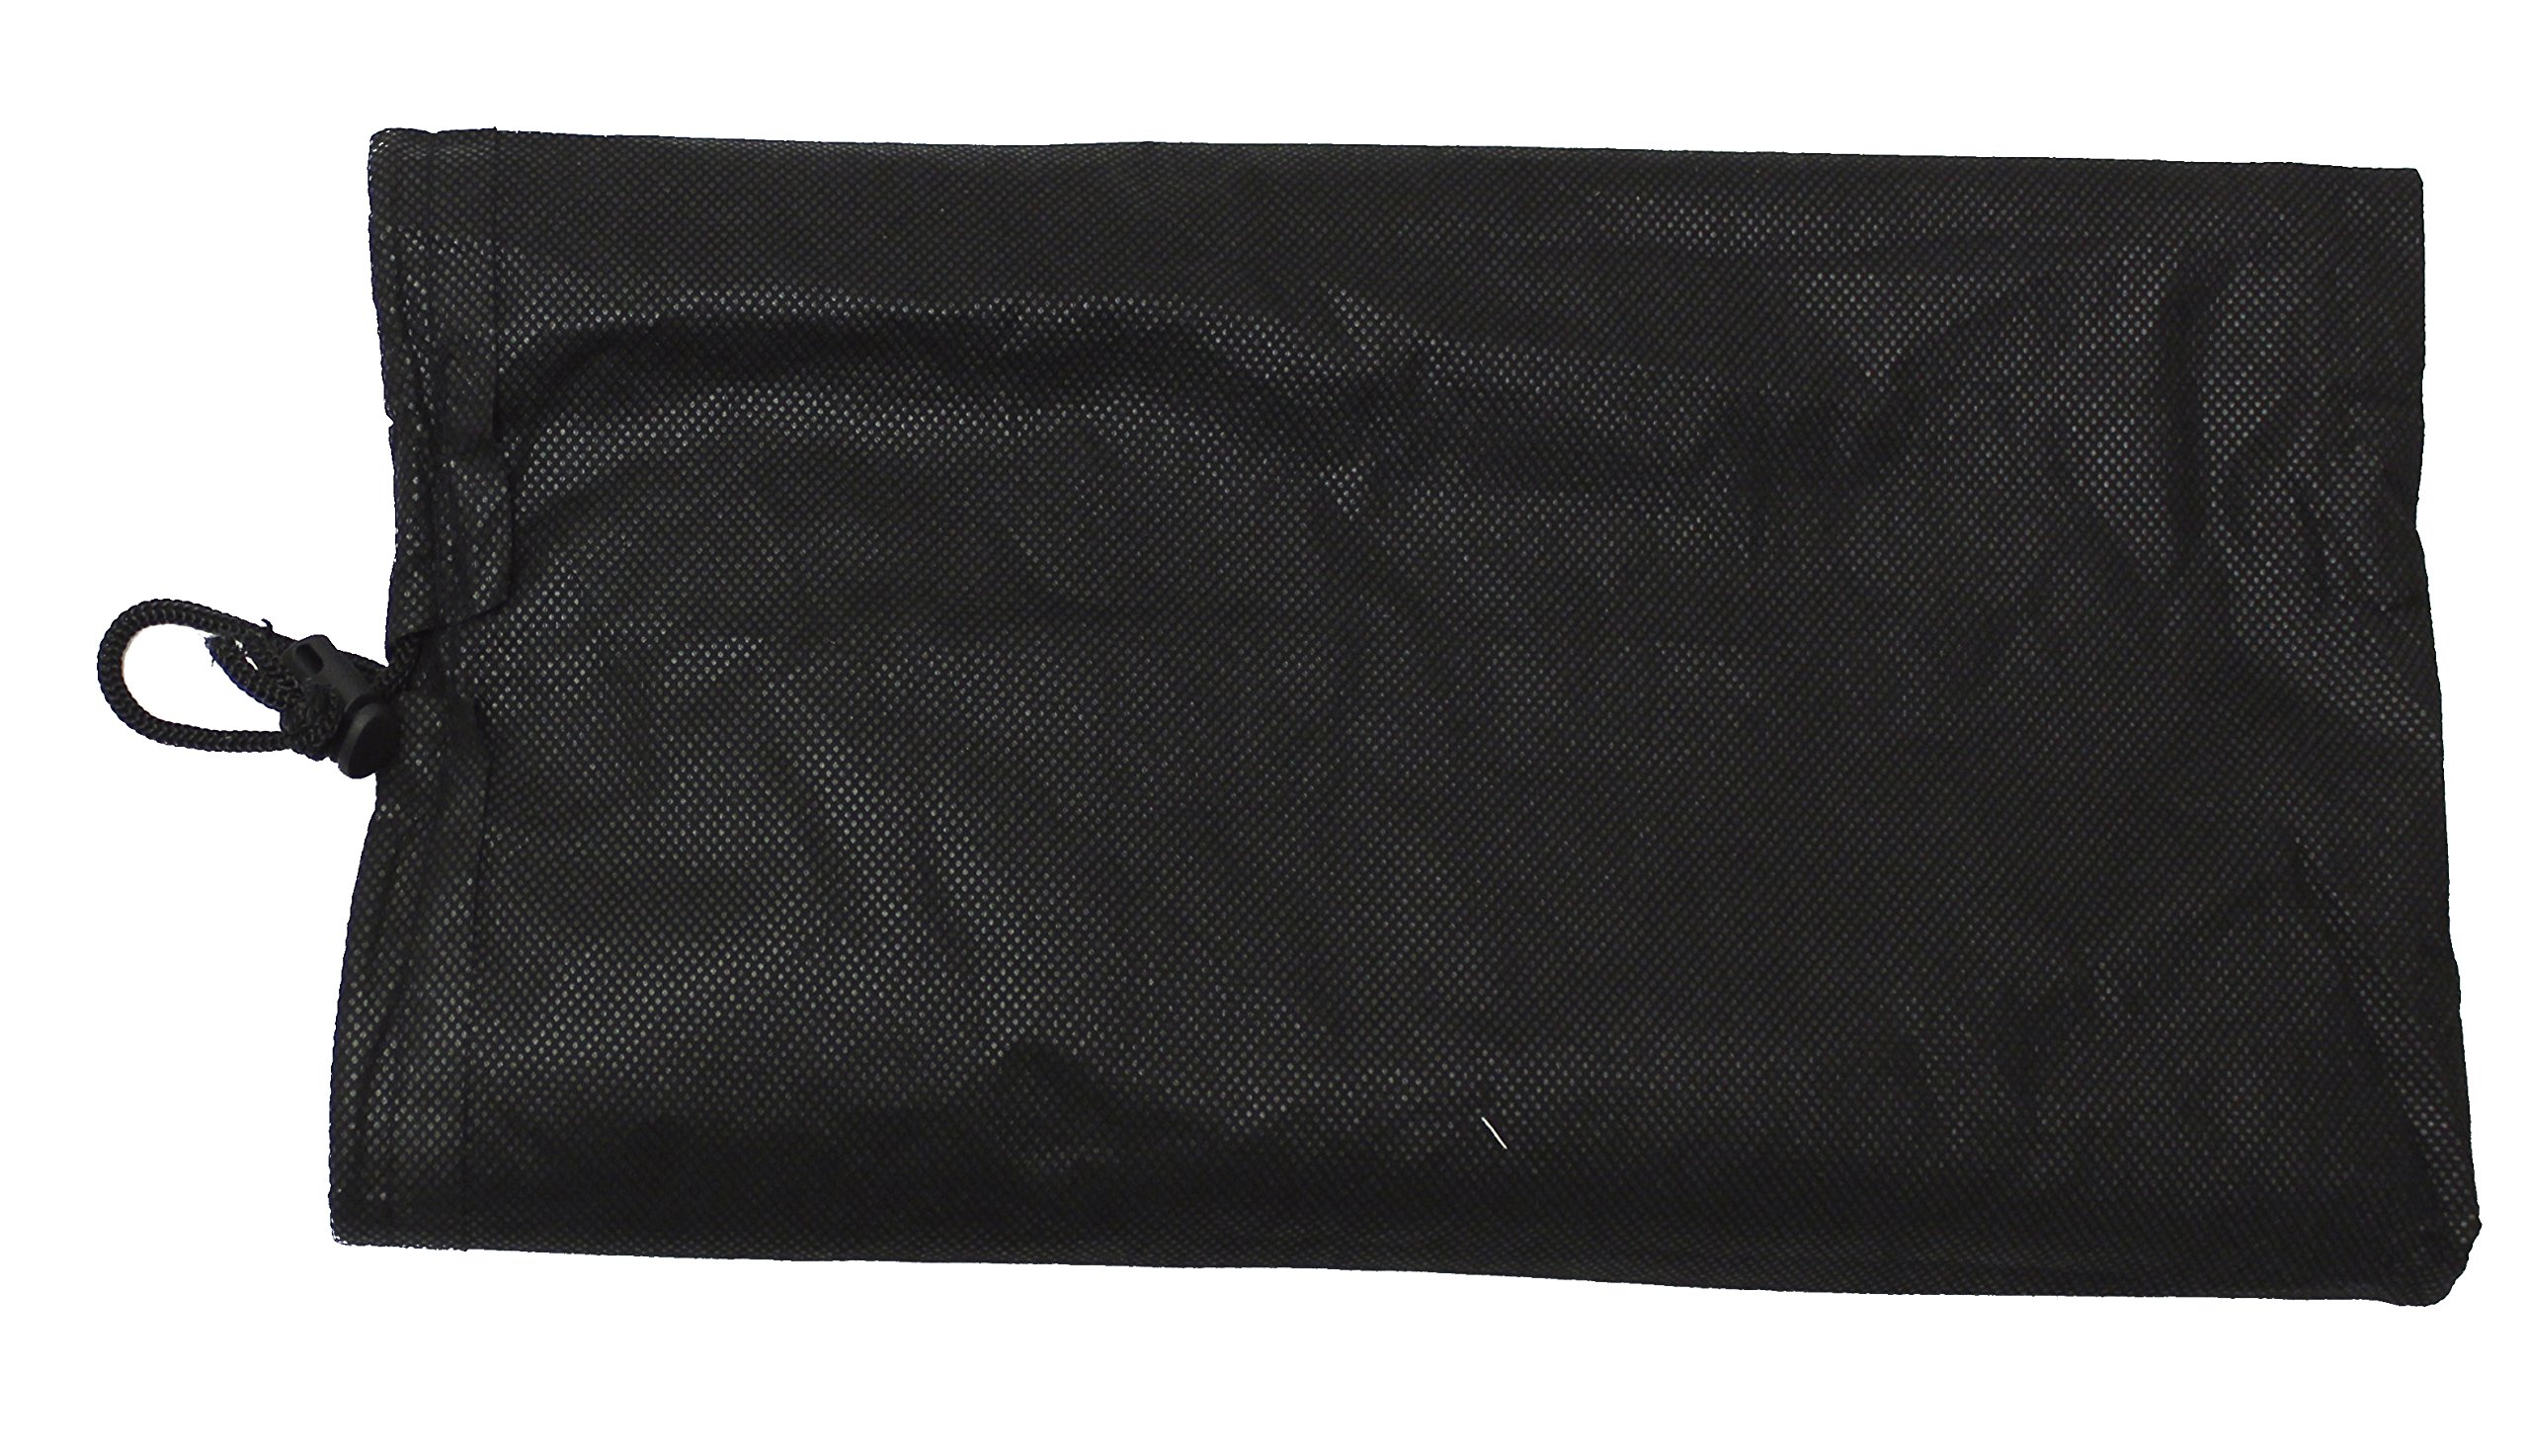 City Pickers Replacement 2 Pack Mulch Cover $5. Reg $9.  F/S for Amazon Prime members.